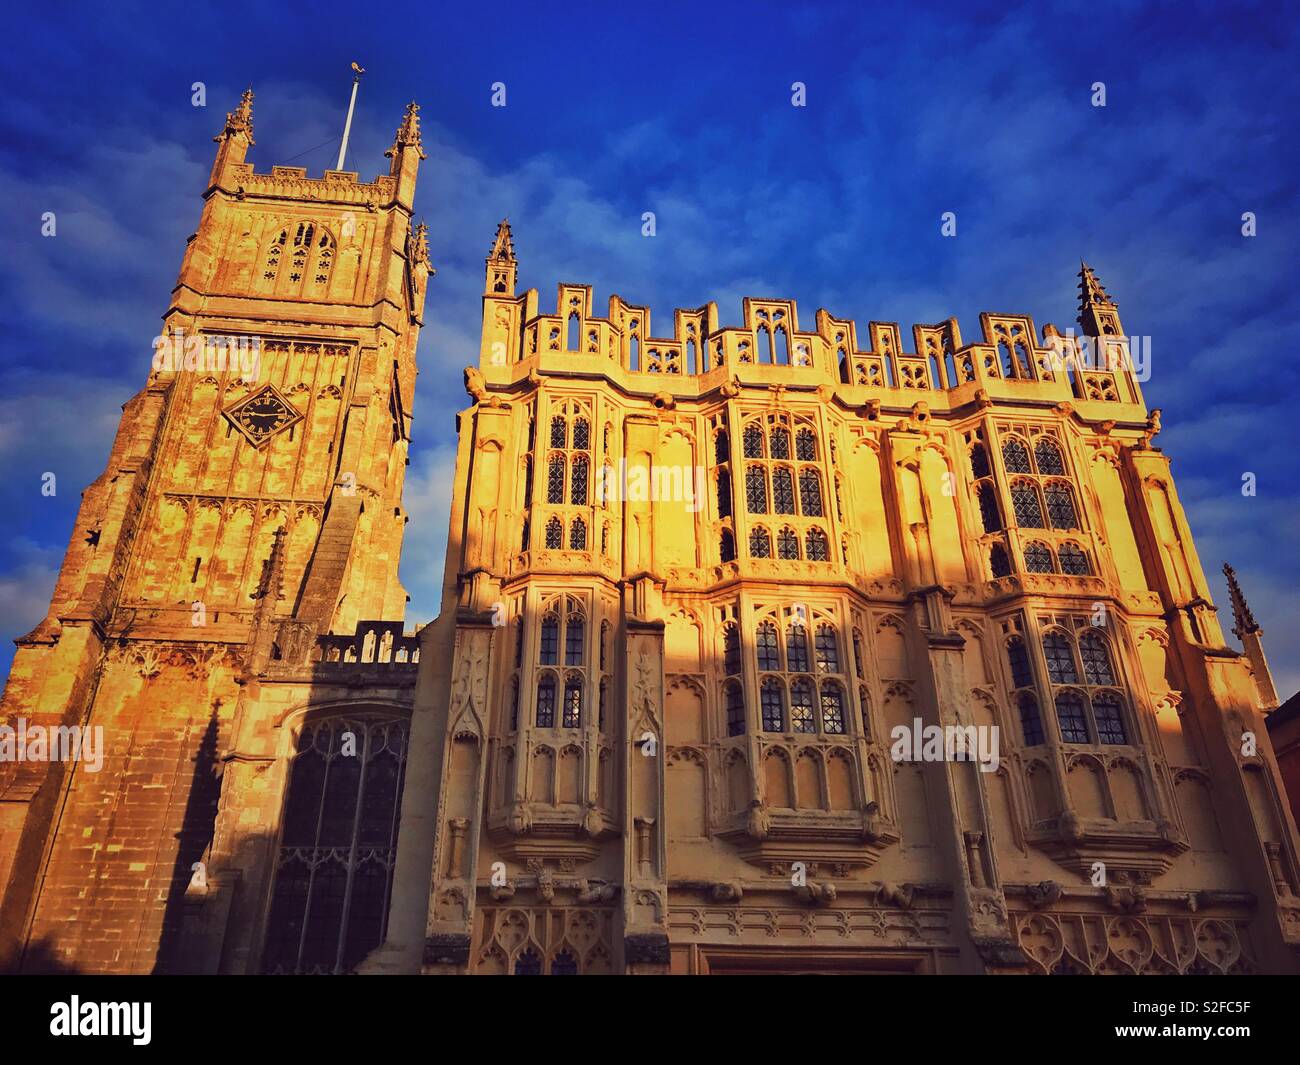 A view of the Bell Tower and Ancient Town Hall that form the exterior view of St. John Baptist Church in the Roman City of Cirencester, Gloucestershire, England. Photo Credit - © COLIN HOSKINS. Stock Photo